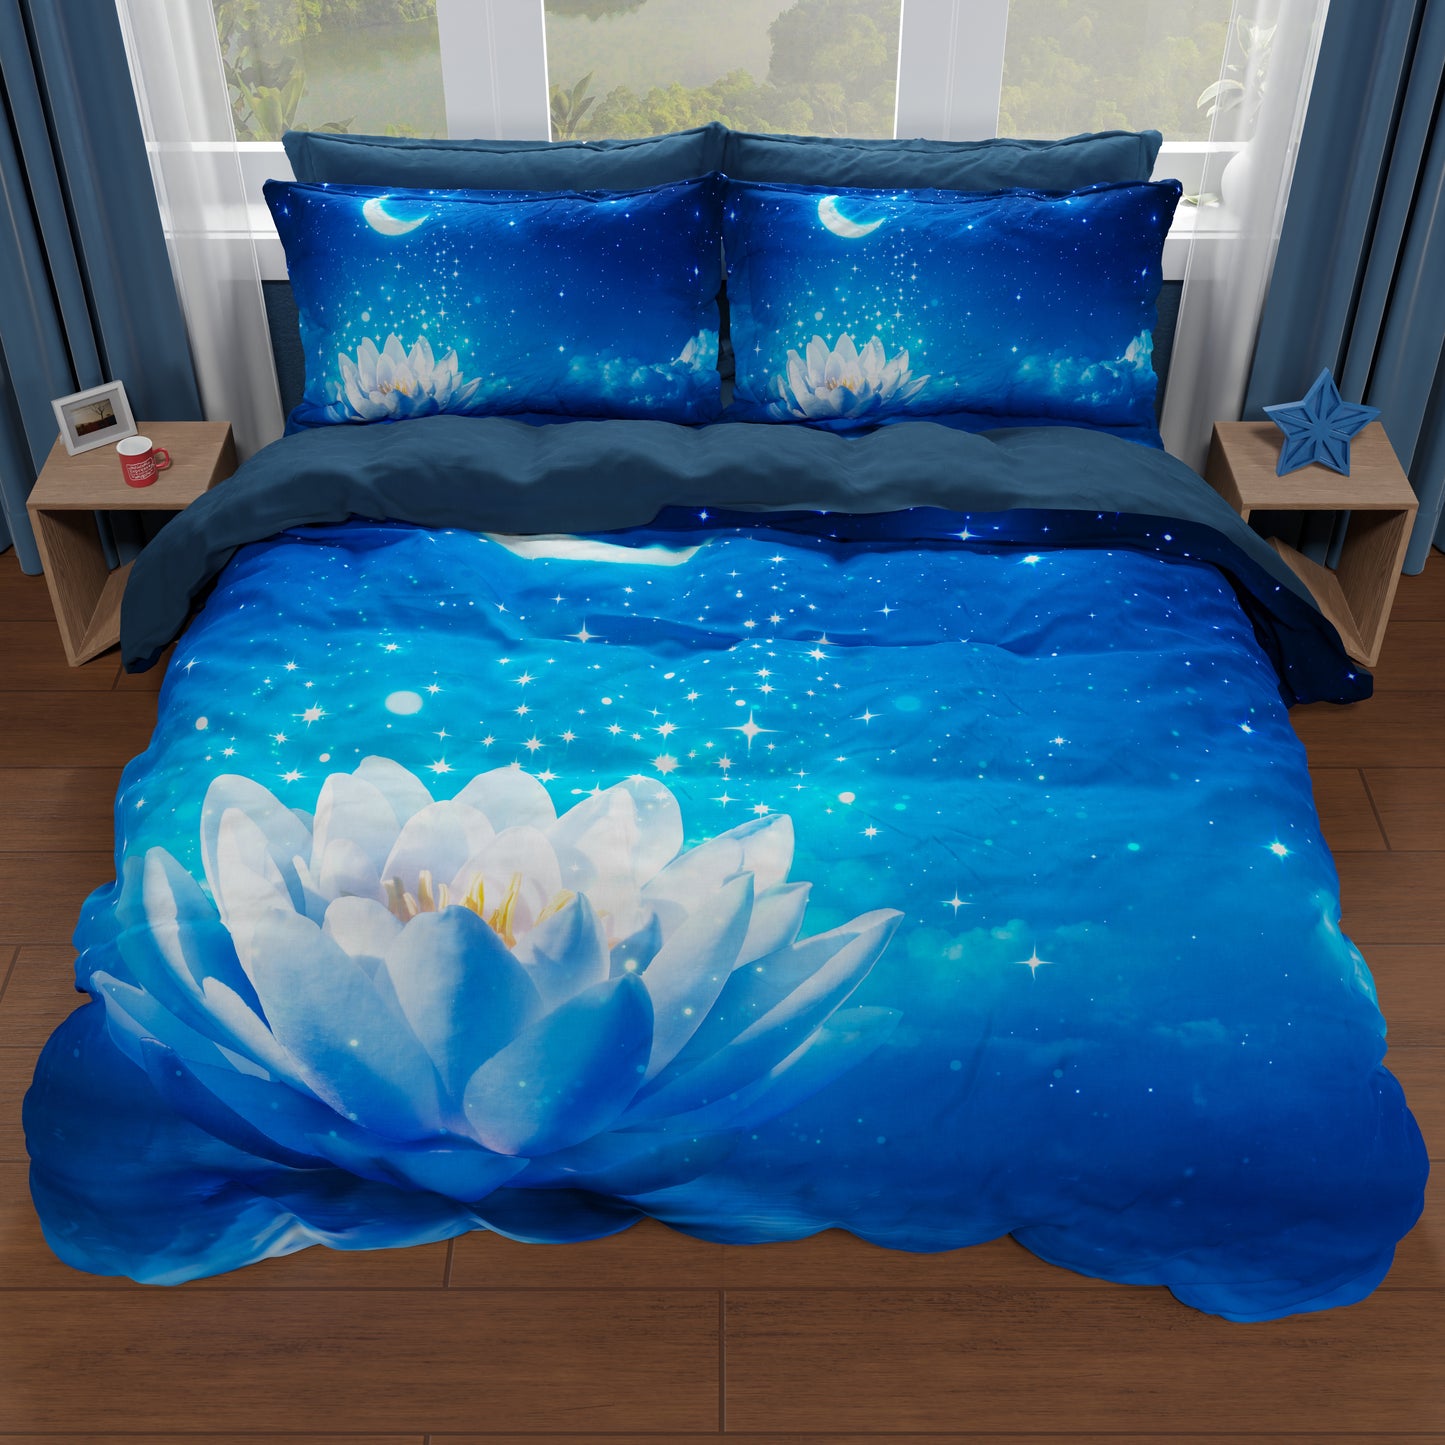 Double, Single, Queen Size Duvet Cover, Starry Night